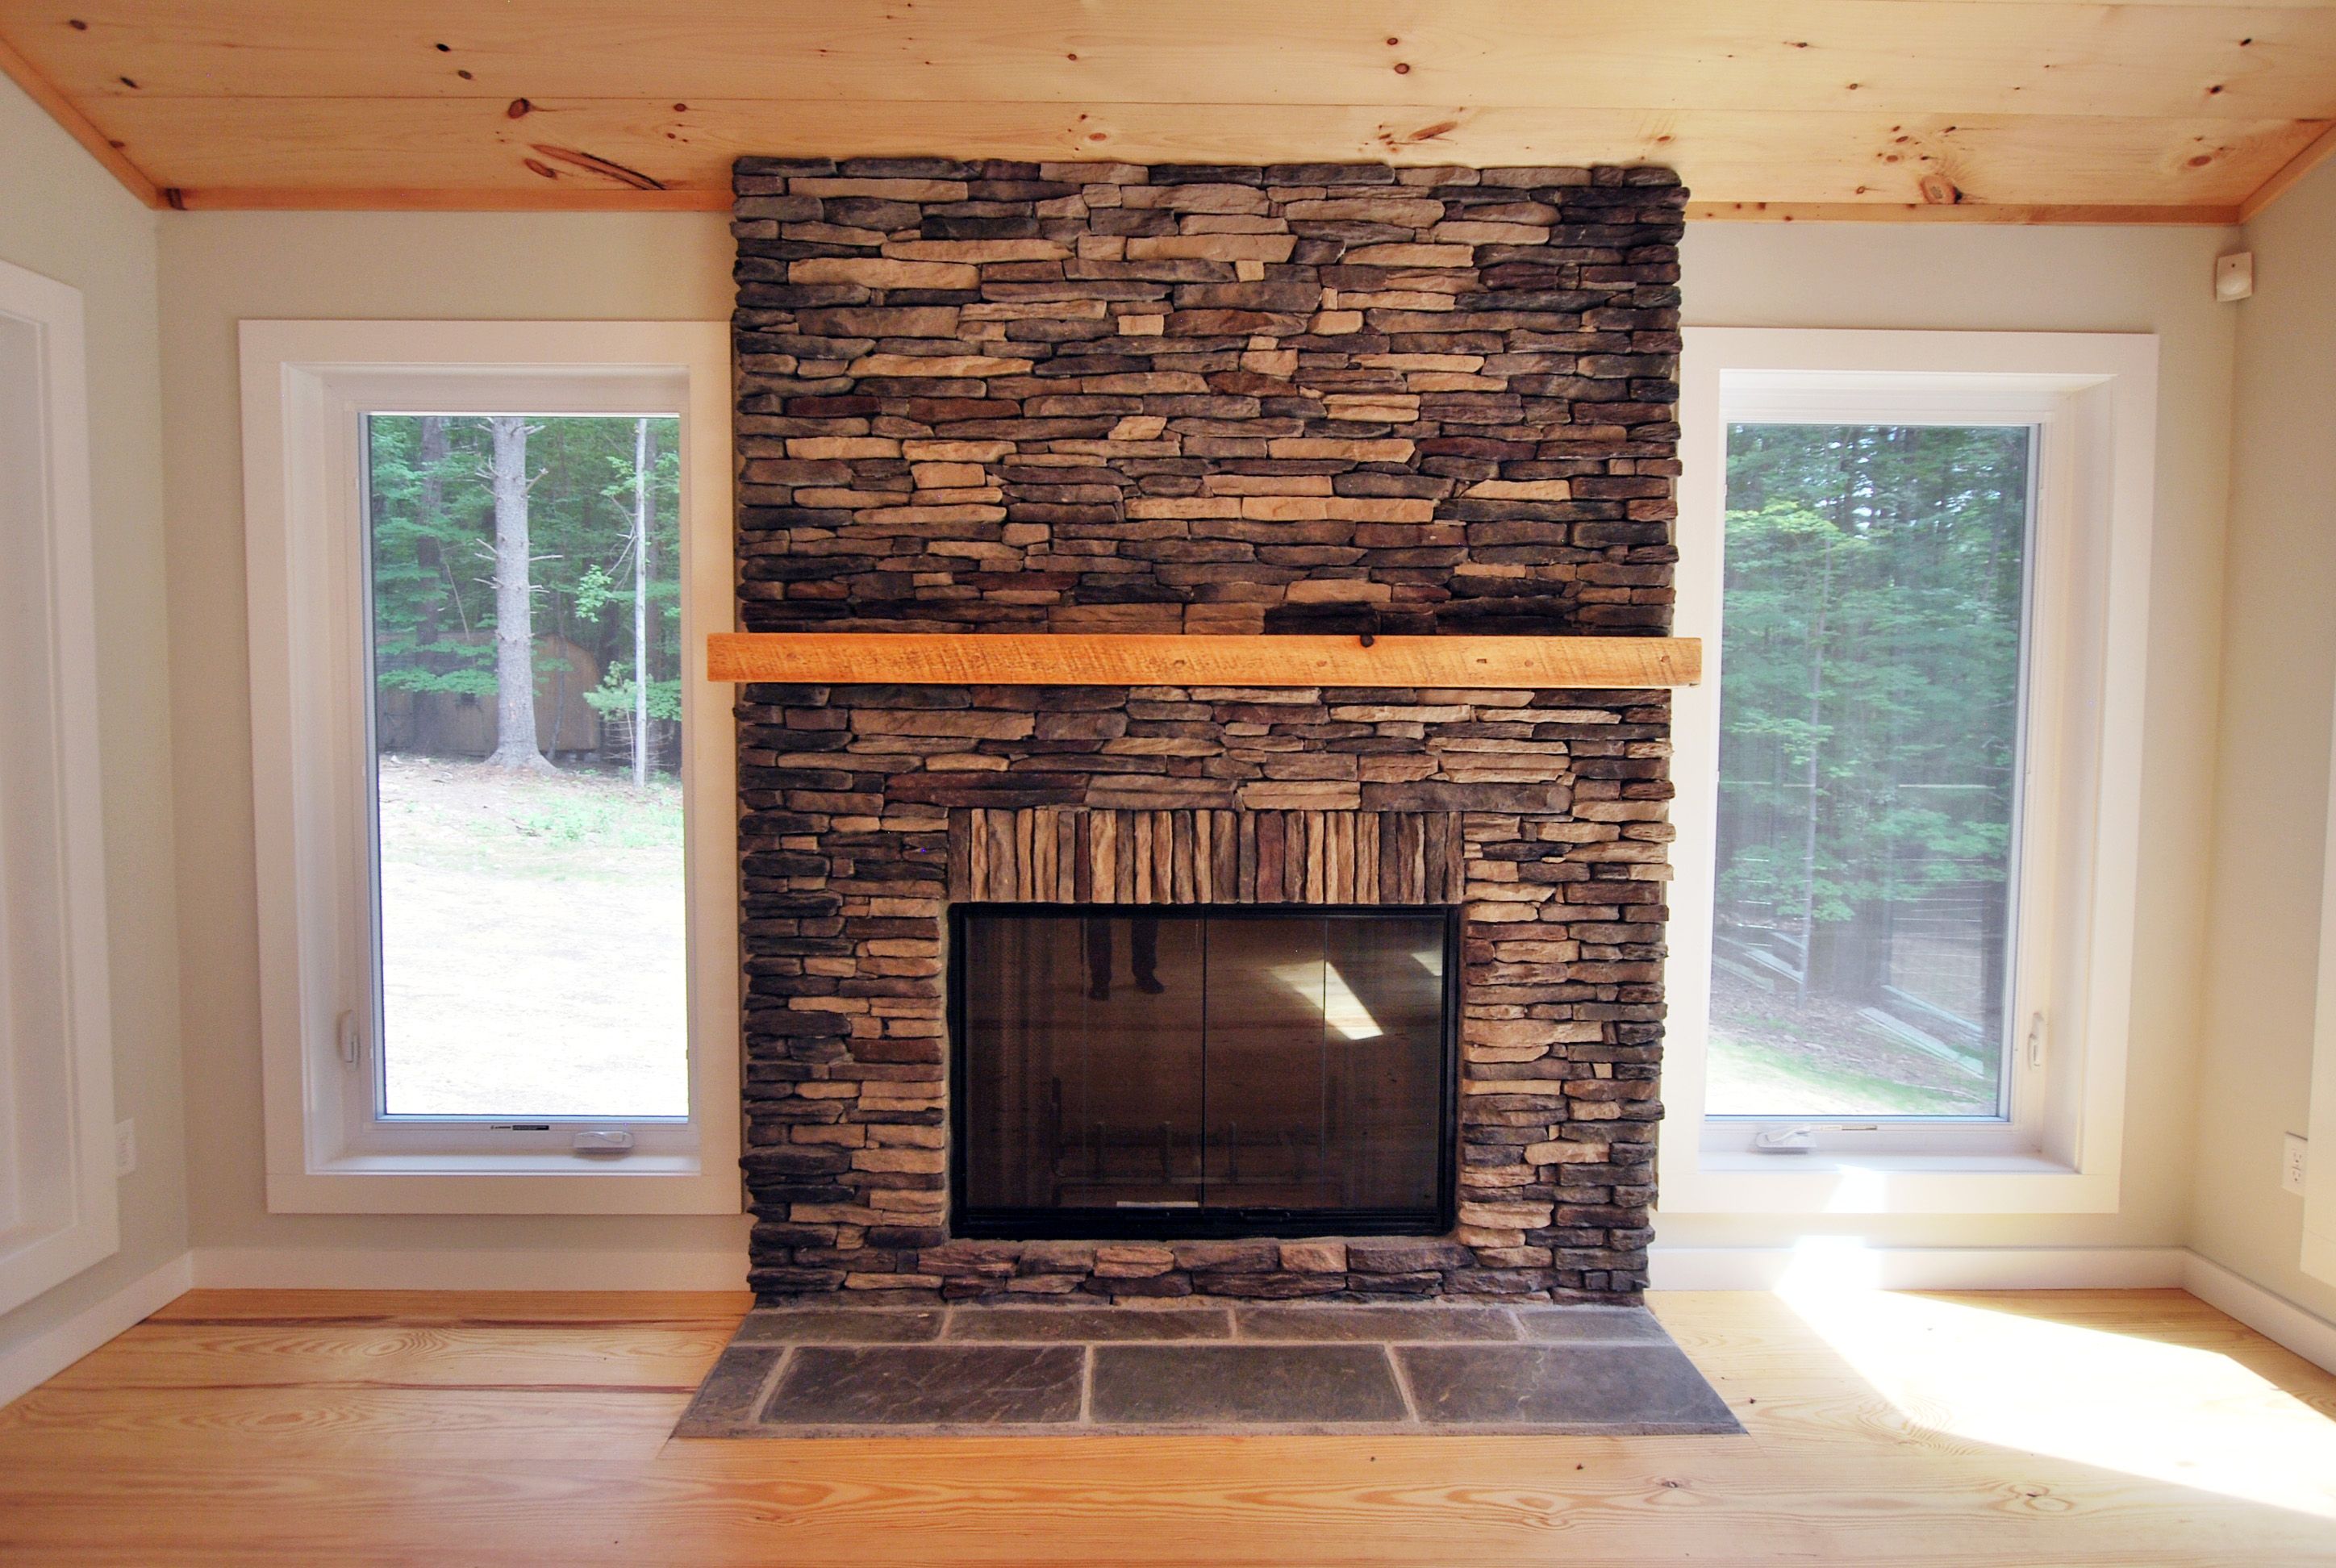 Fireplace Beams Fresh Tennessee Laurel Cavern Ledge Stone with A Smooth Beam